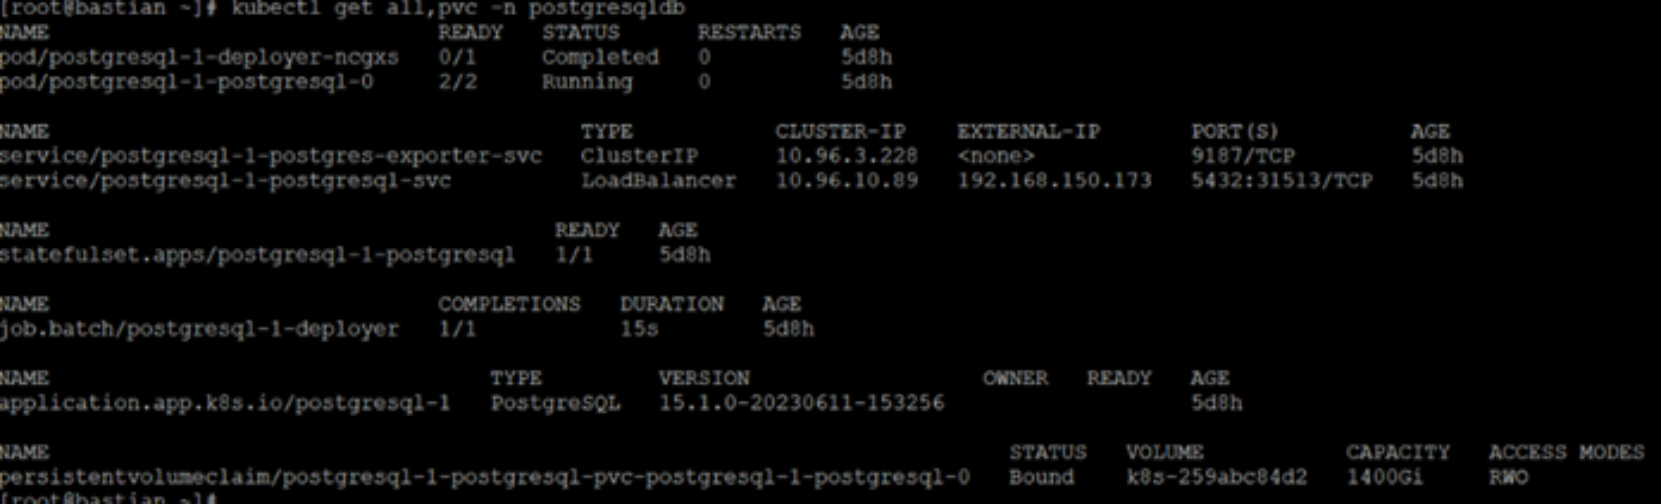 This figure shows the PostgreSQL application pod in the namespace.